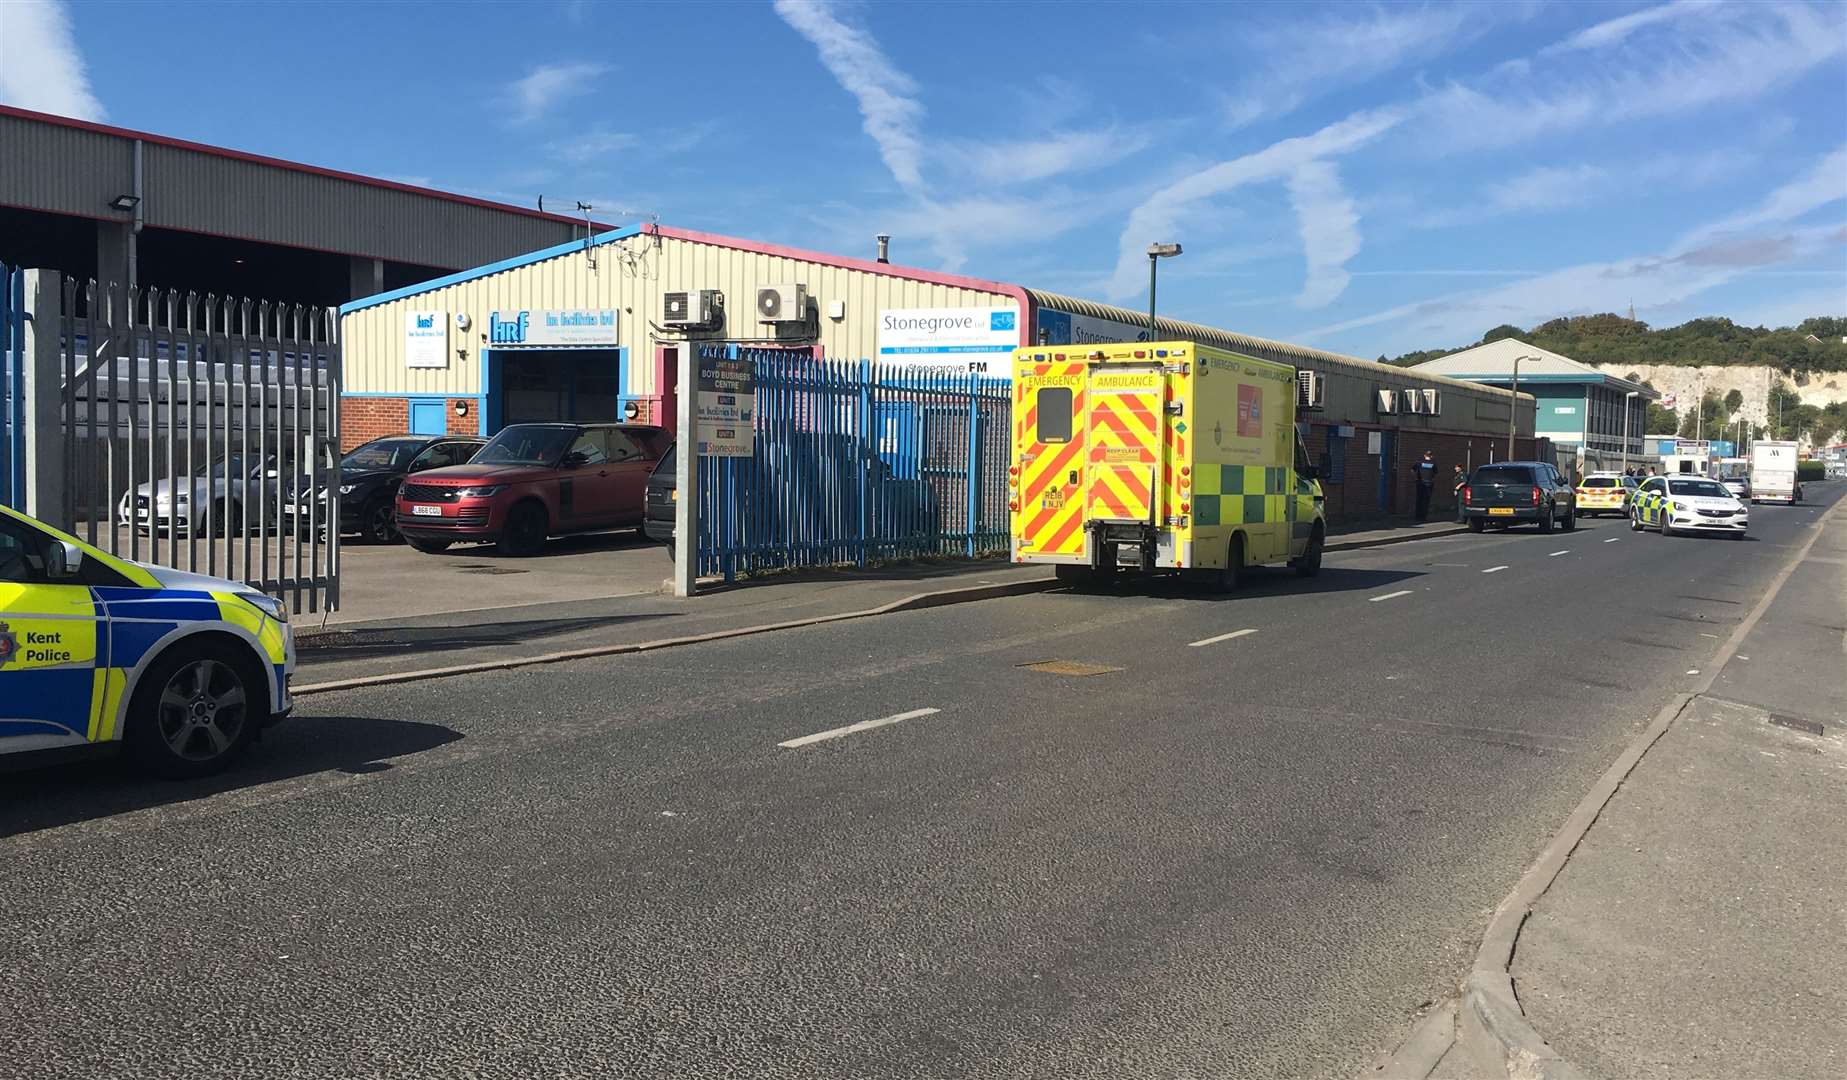 Three police cars and three ambulance vehicles were at the business